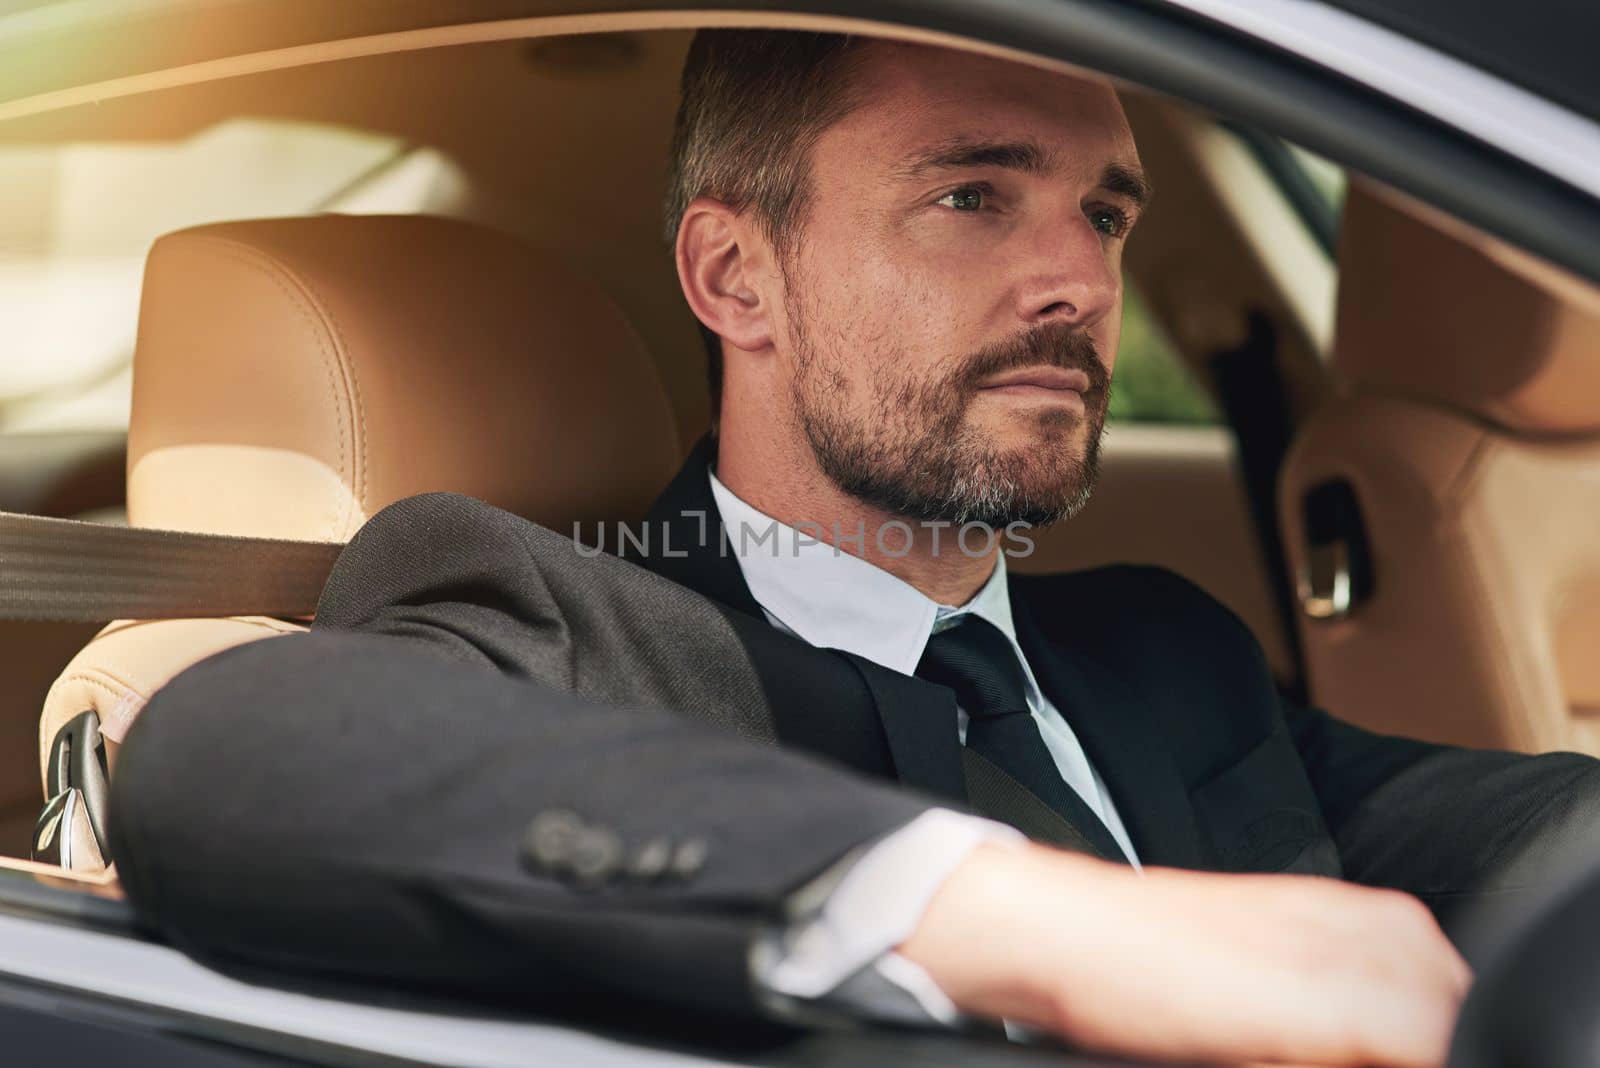 Driving himself to work. a handsome businessman on his morning commute to work